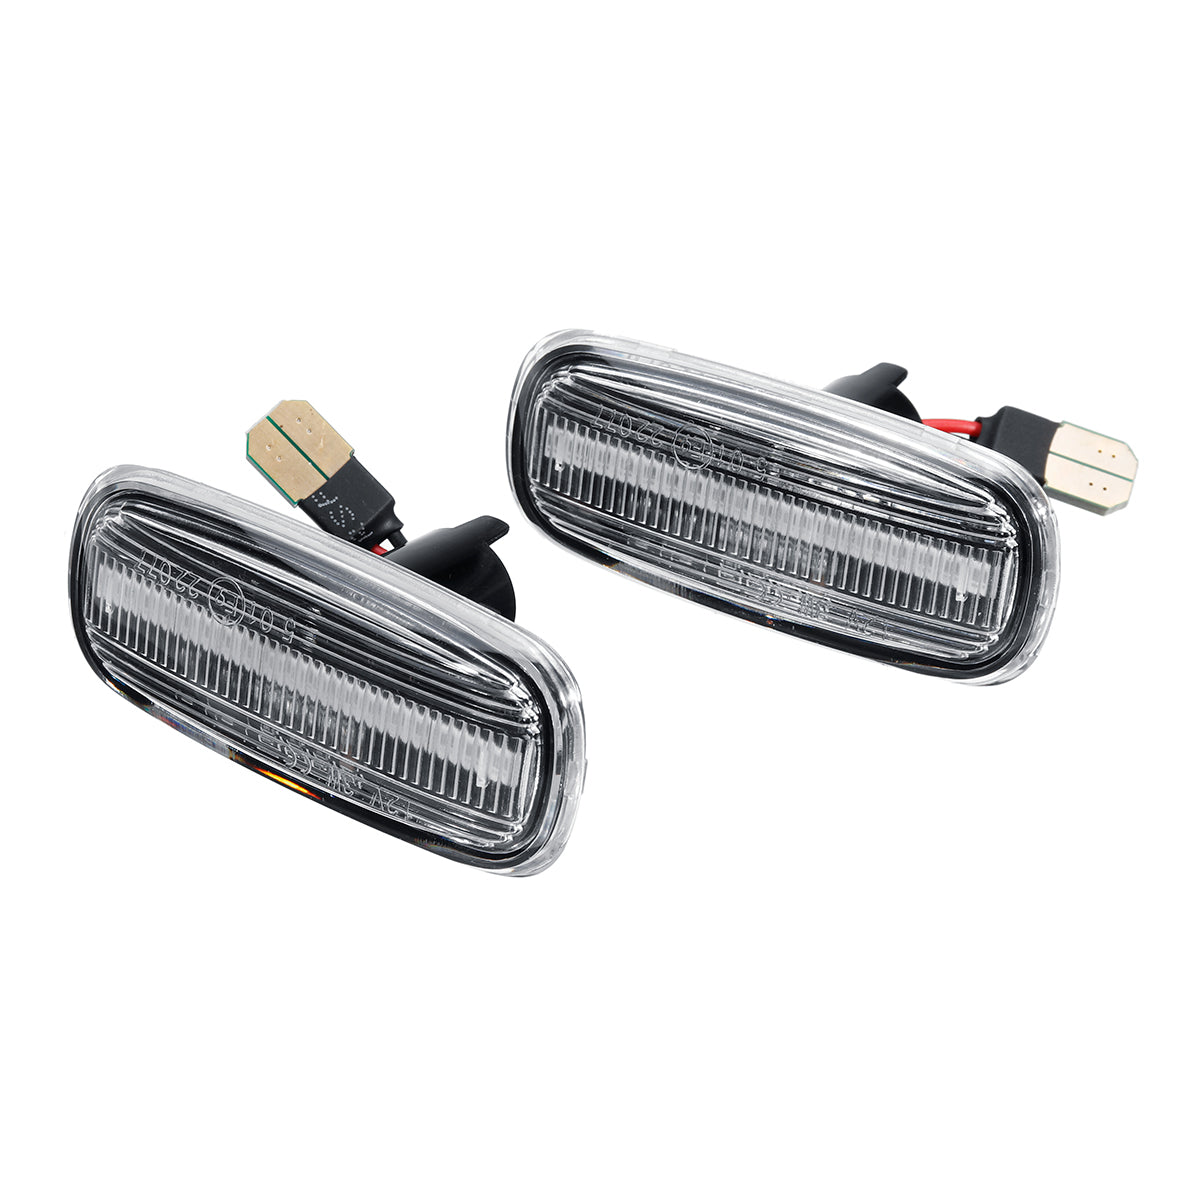 Dim Gray Pair LED Side Marker Turn Signal Lights Lamp Yellow For Audi A3 S3 8L A8 D2 TT 8N